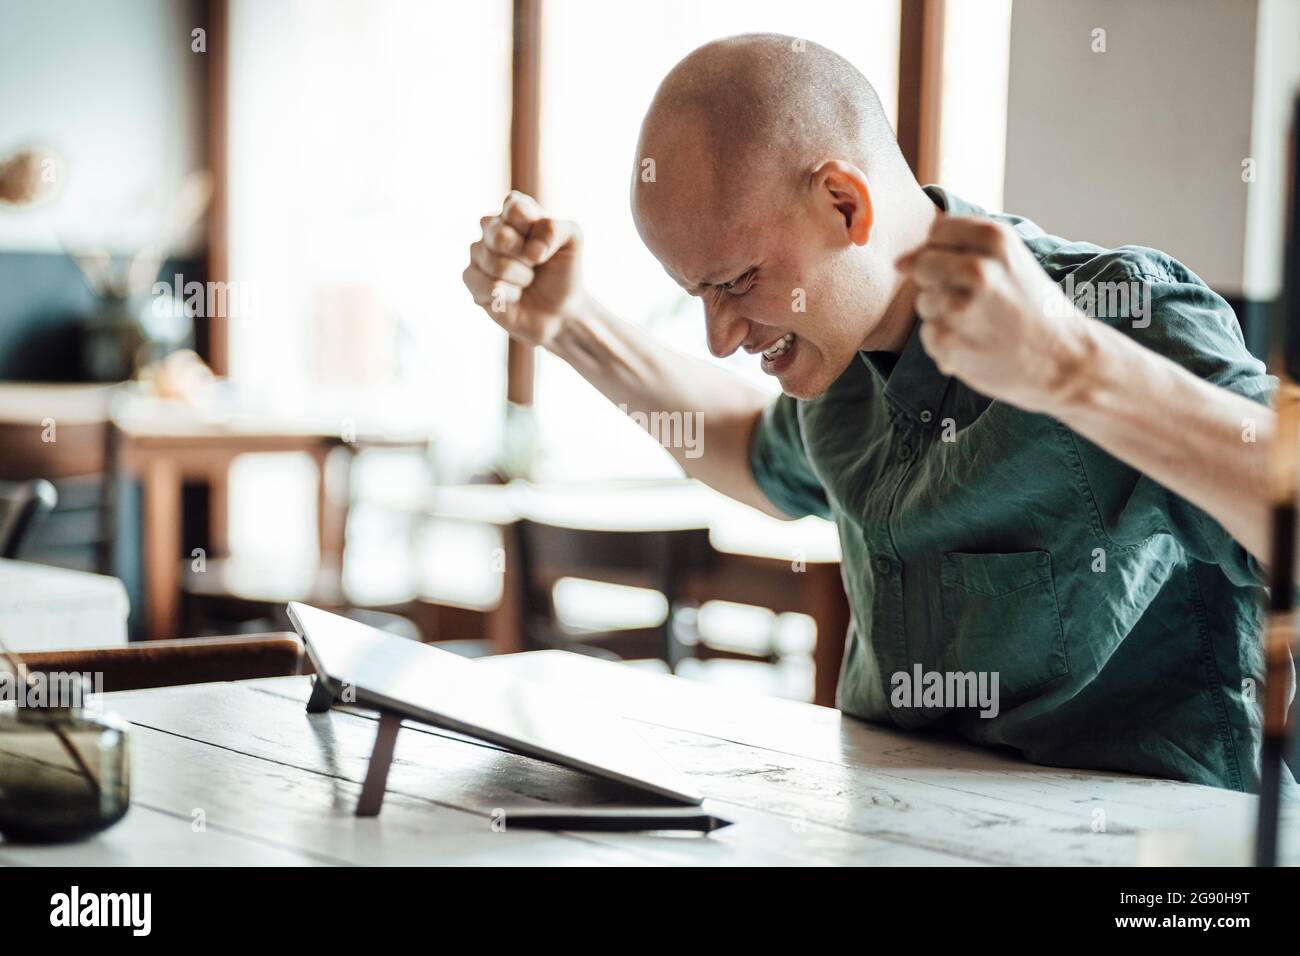 Bald male design professional cheering in excitement while looking at graphics tablet Stock Photo